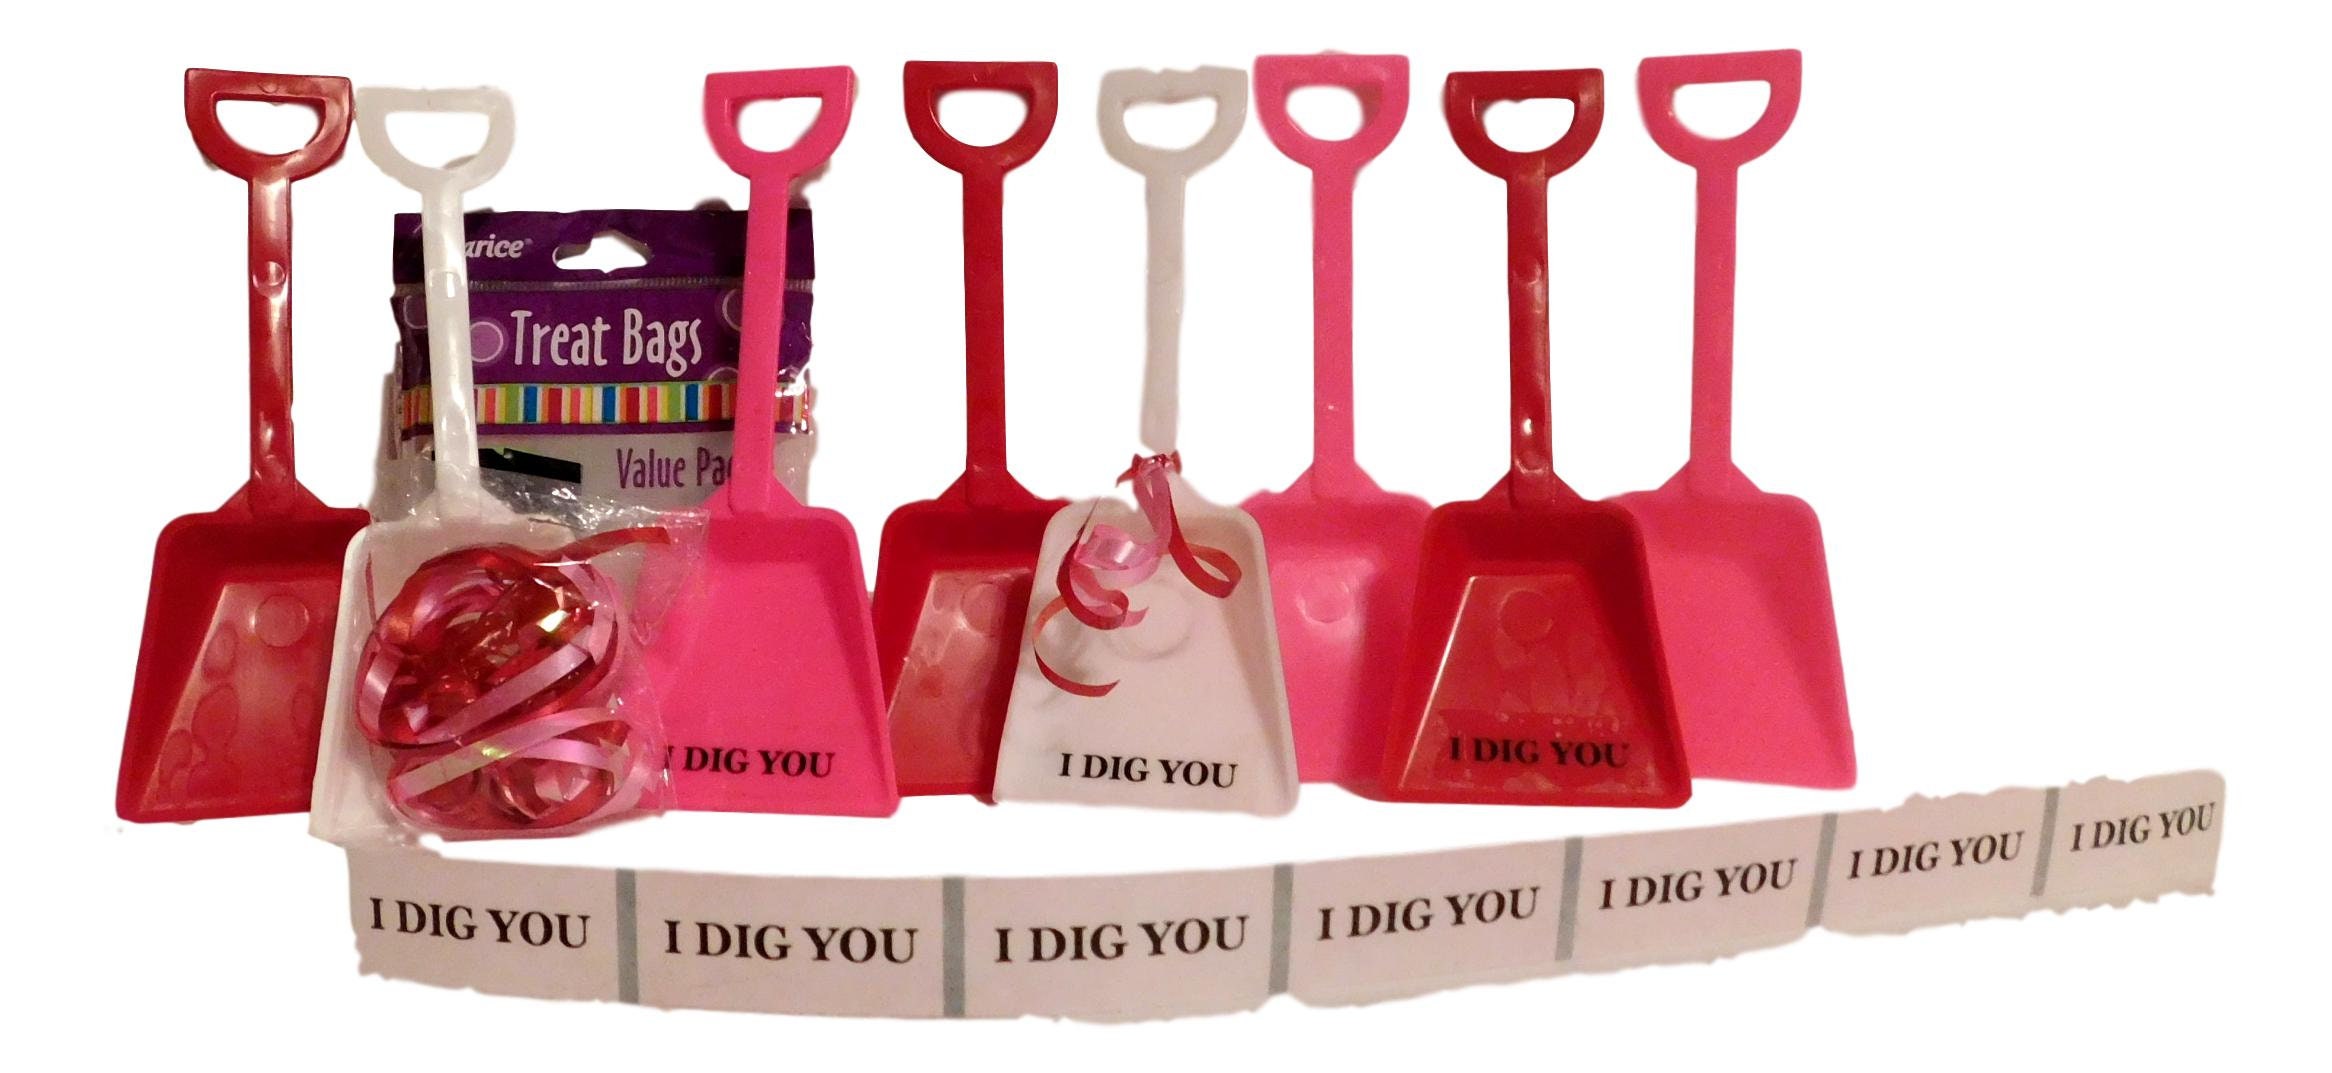 white pink with stickers. 72 toy shovels for Valentines day 24 each Red